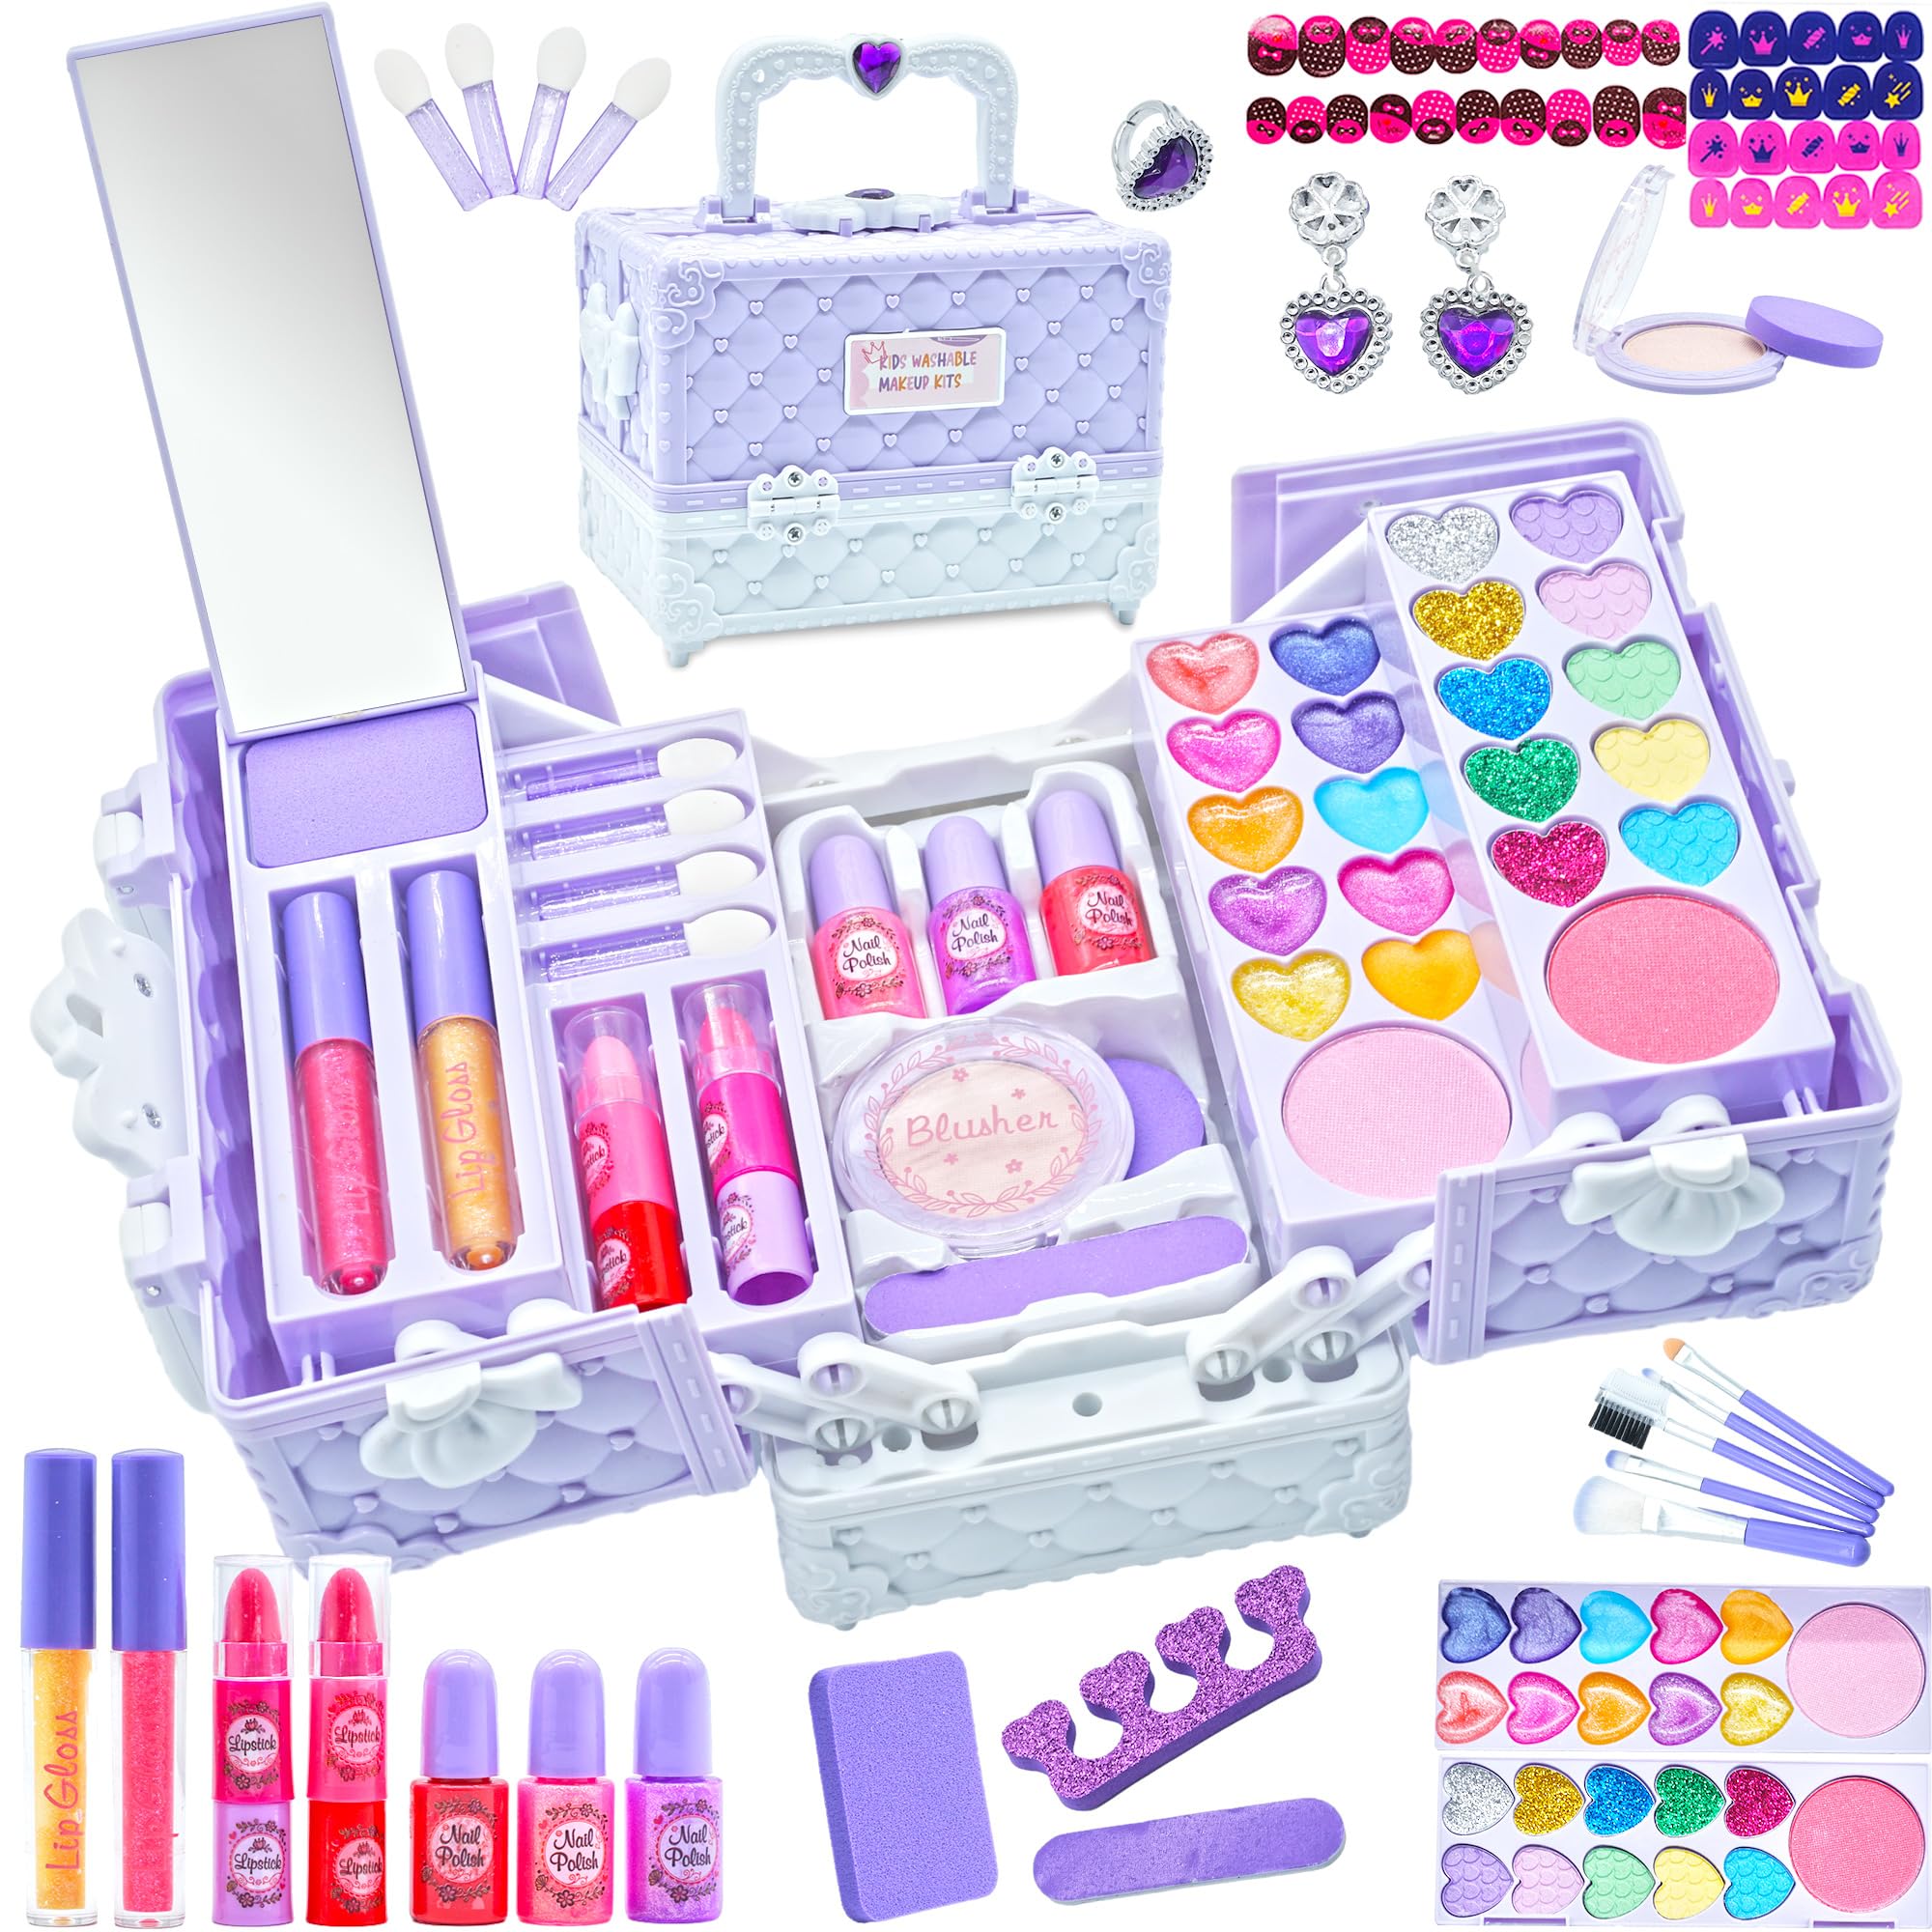 Amerrly Kids Makeup Kit for Girl - Safe and Washable Makeup for Kids, Real Girls Makeup Kit, Toddler Makeup Kit with Cosmetic Case, Girl